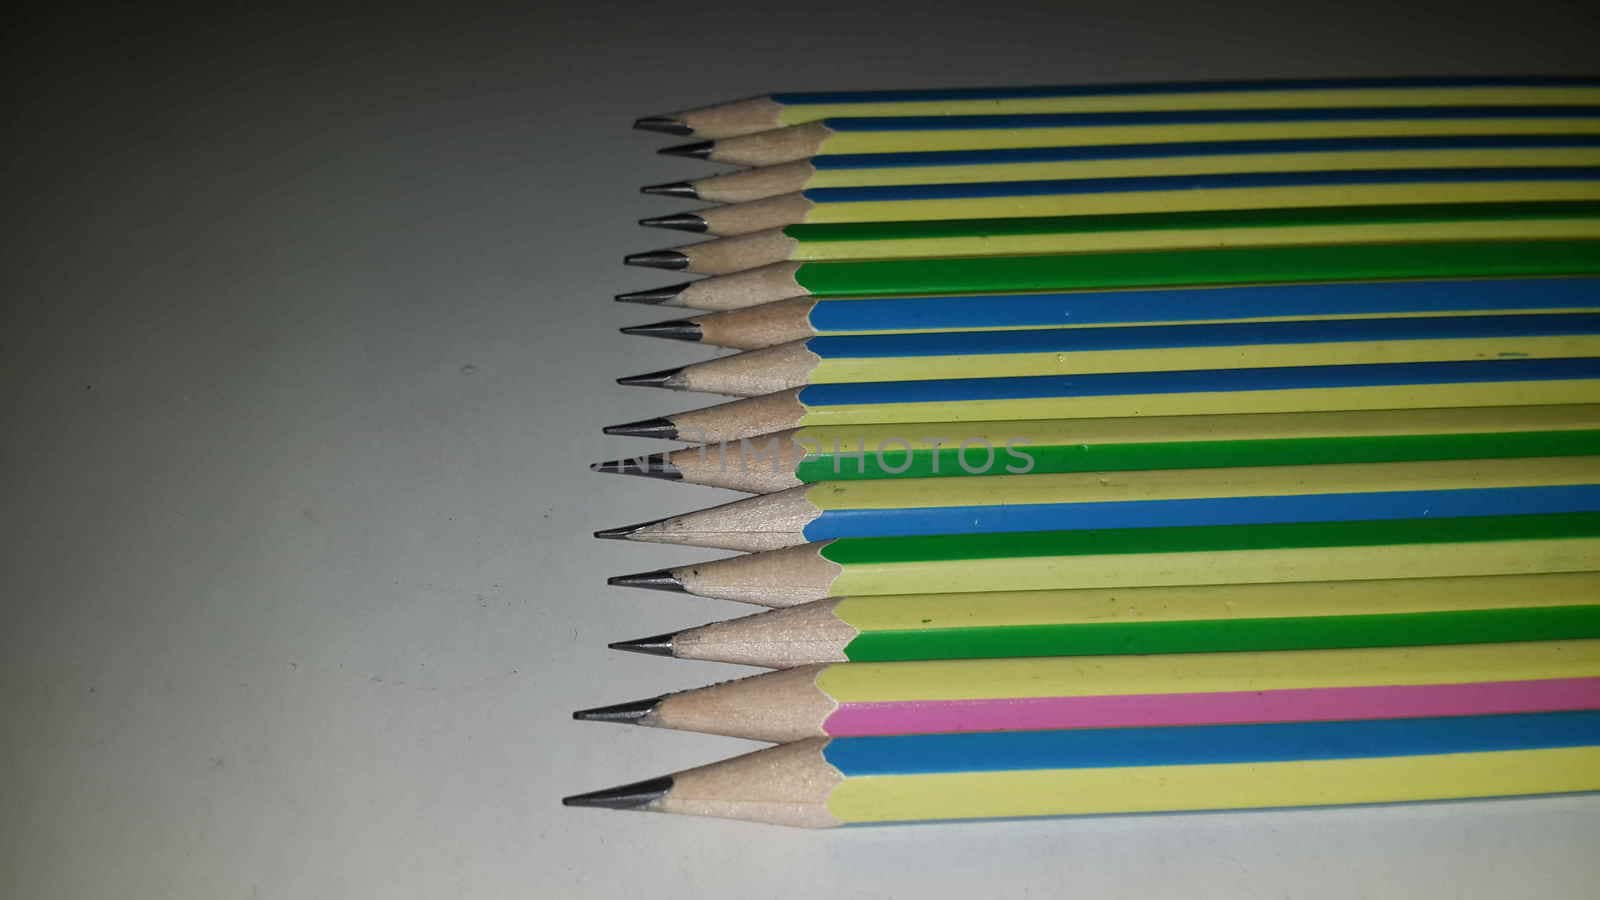 Is written in pencil Or media arts Usually made of solid pigment and narrow pencil meat inside the shell that protects it from breaking or leaving a mark on the hand during use.
Pencil marks created by graffiti. Leaving solid material pencil with a pencil, paper or other surfaces that differ from the pen. To spread the footprint of liquid or gel ink onto paper with a lighter.